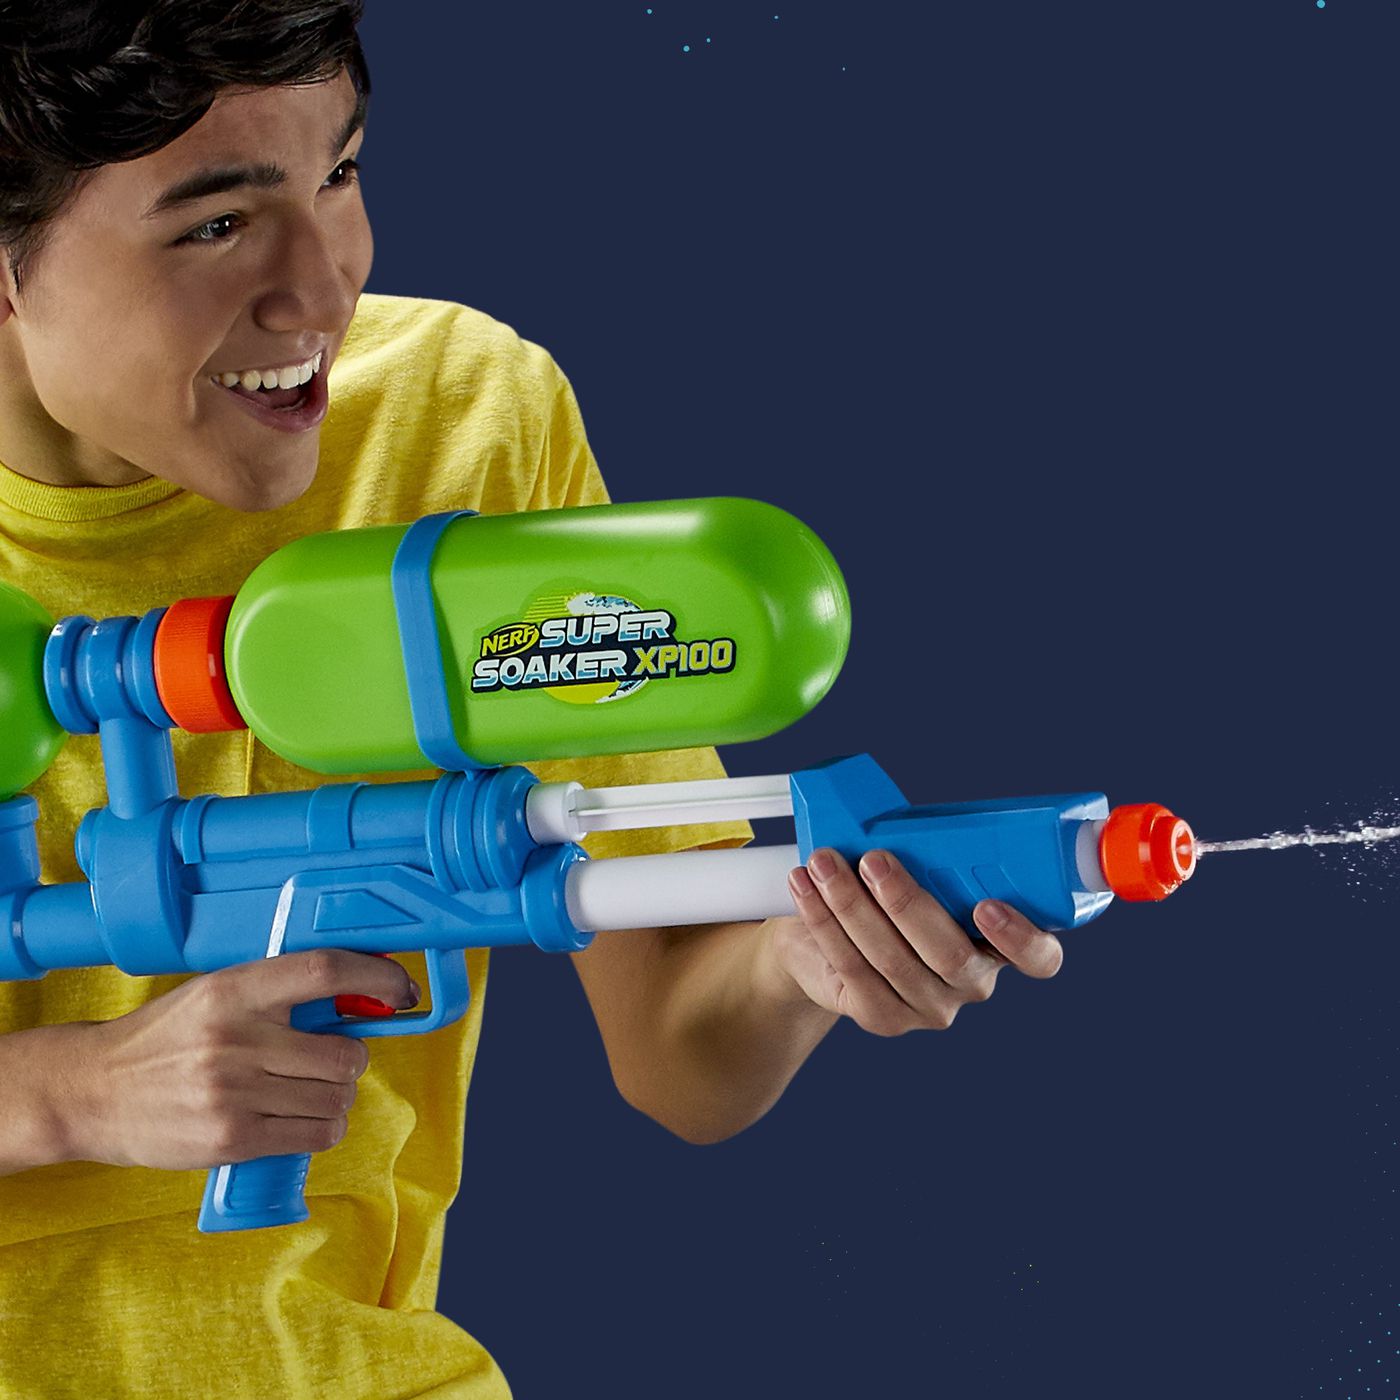 Who Invented The Water Gun?